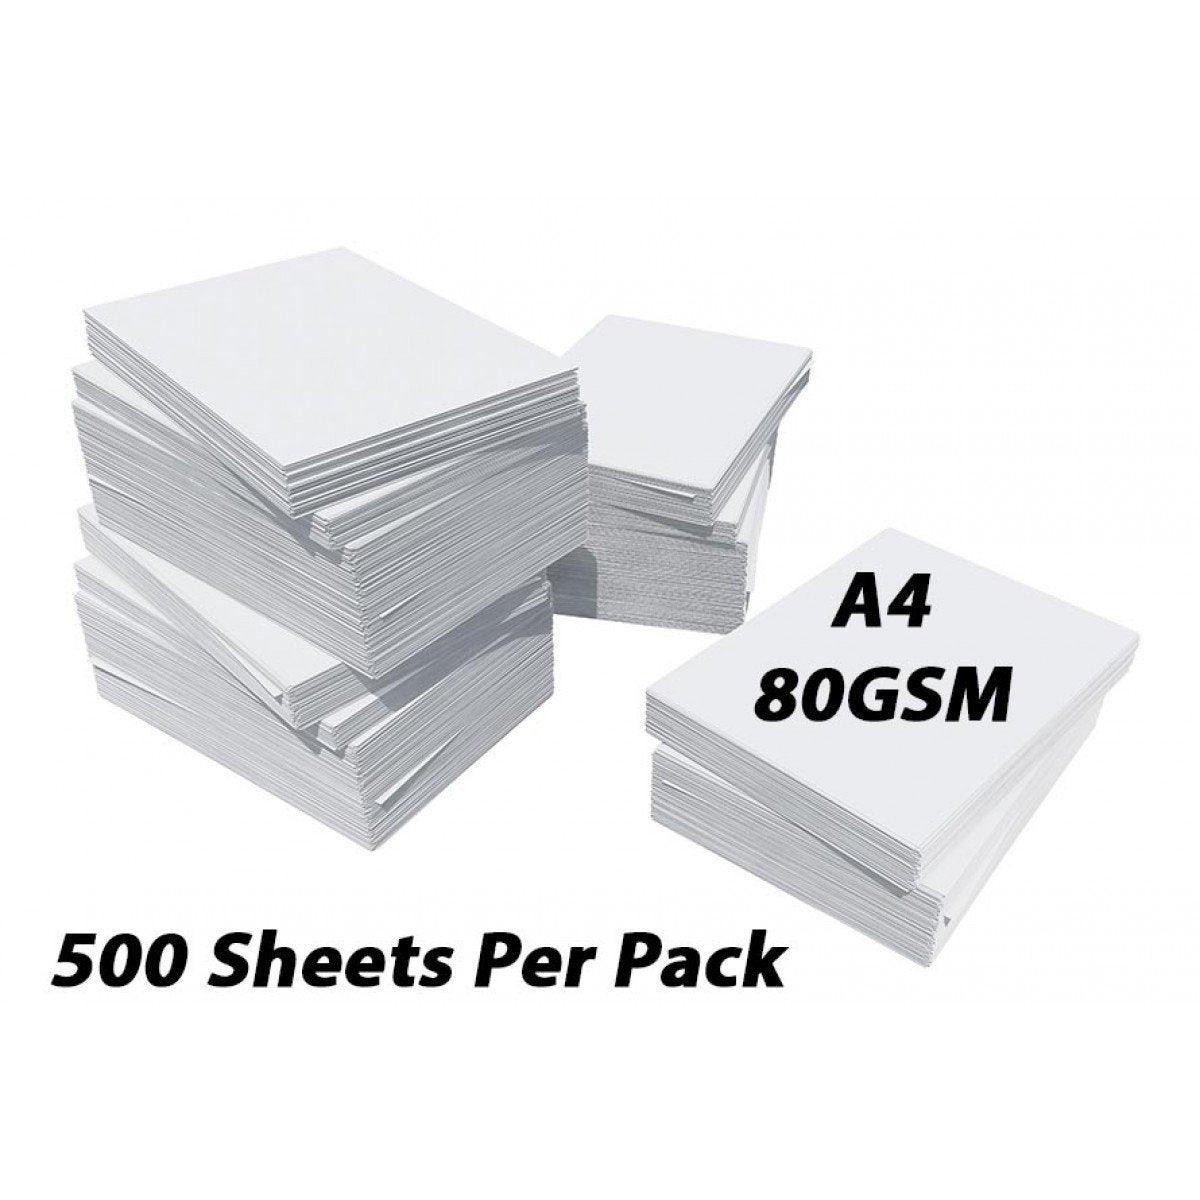 A4 80gsm White Paper 500 sheets - Tattoo Everything Supplies